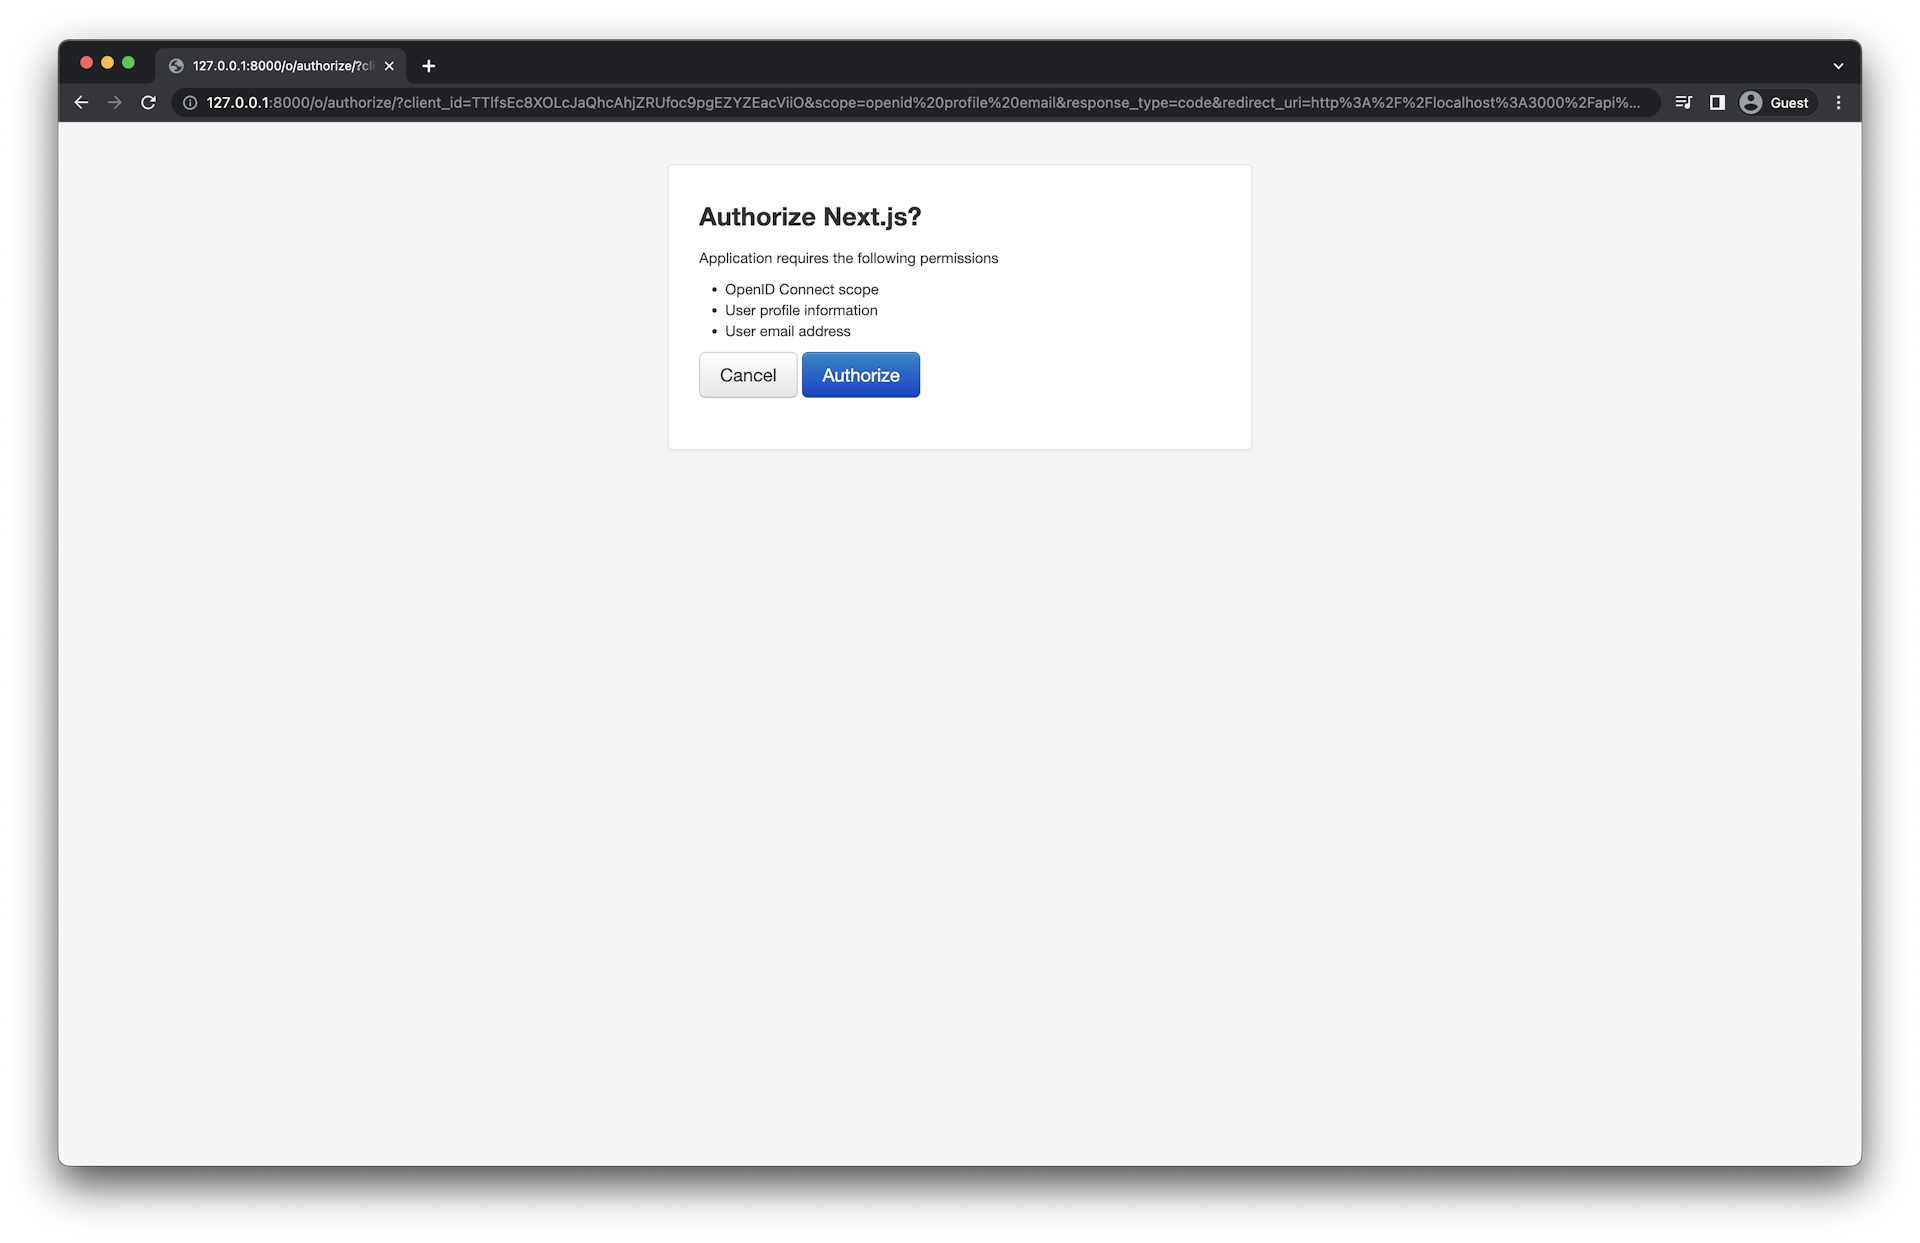 OAuth application authorization screen